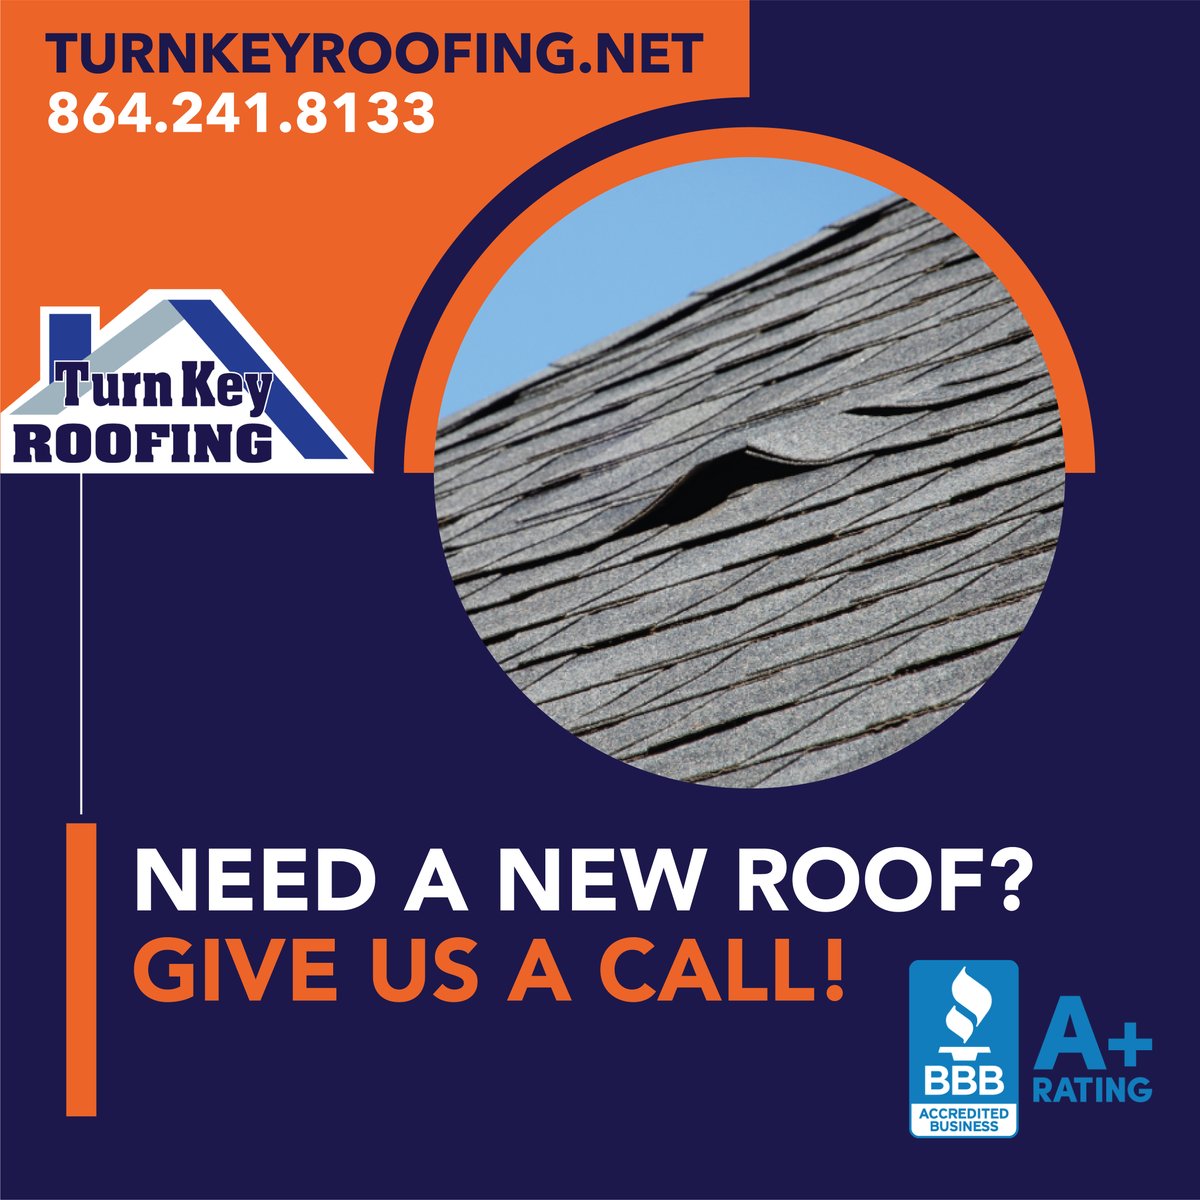 Need a new roof? Give us a call!

📲864.241.8133

#RoofingContractor #Roofing #NewRoof #Andersonismytown #YeahthatGreenville #TurnKeyRoofing #RoofInspection #Home #stormdamage #residential #roofing